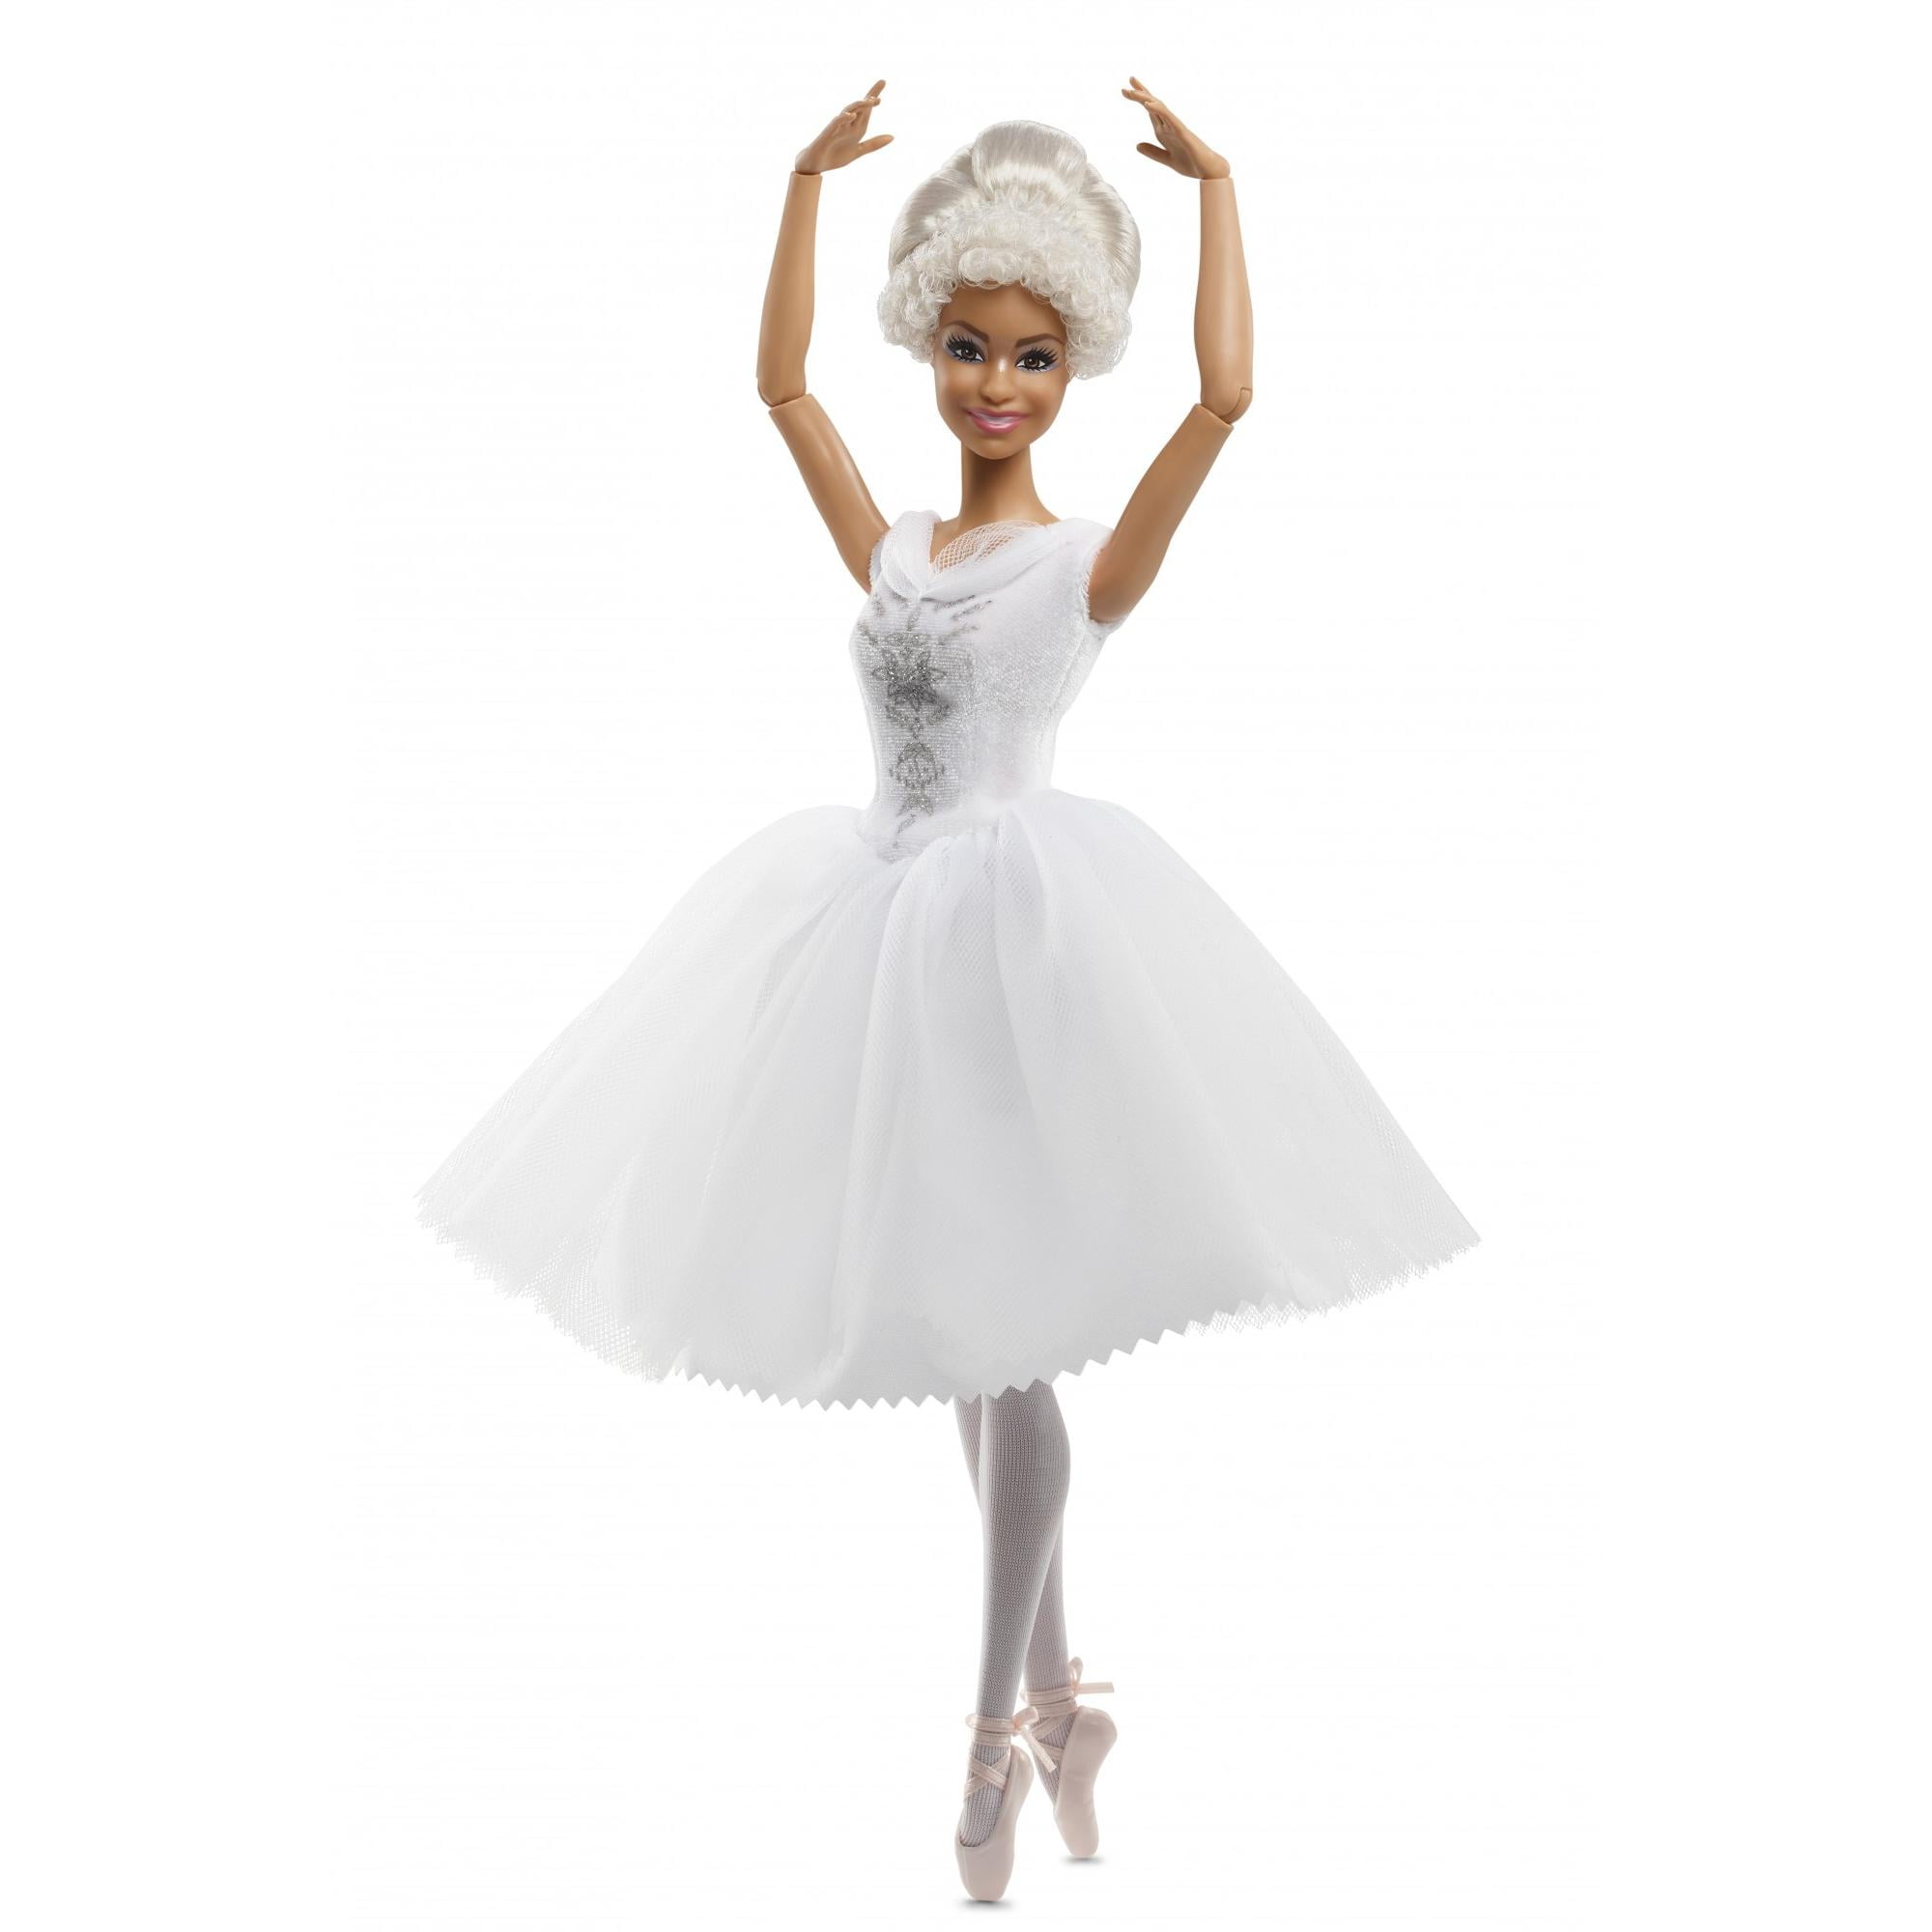 Realms and Ballerina of Four Barbie Nutcracker Doll the the Realms The